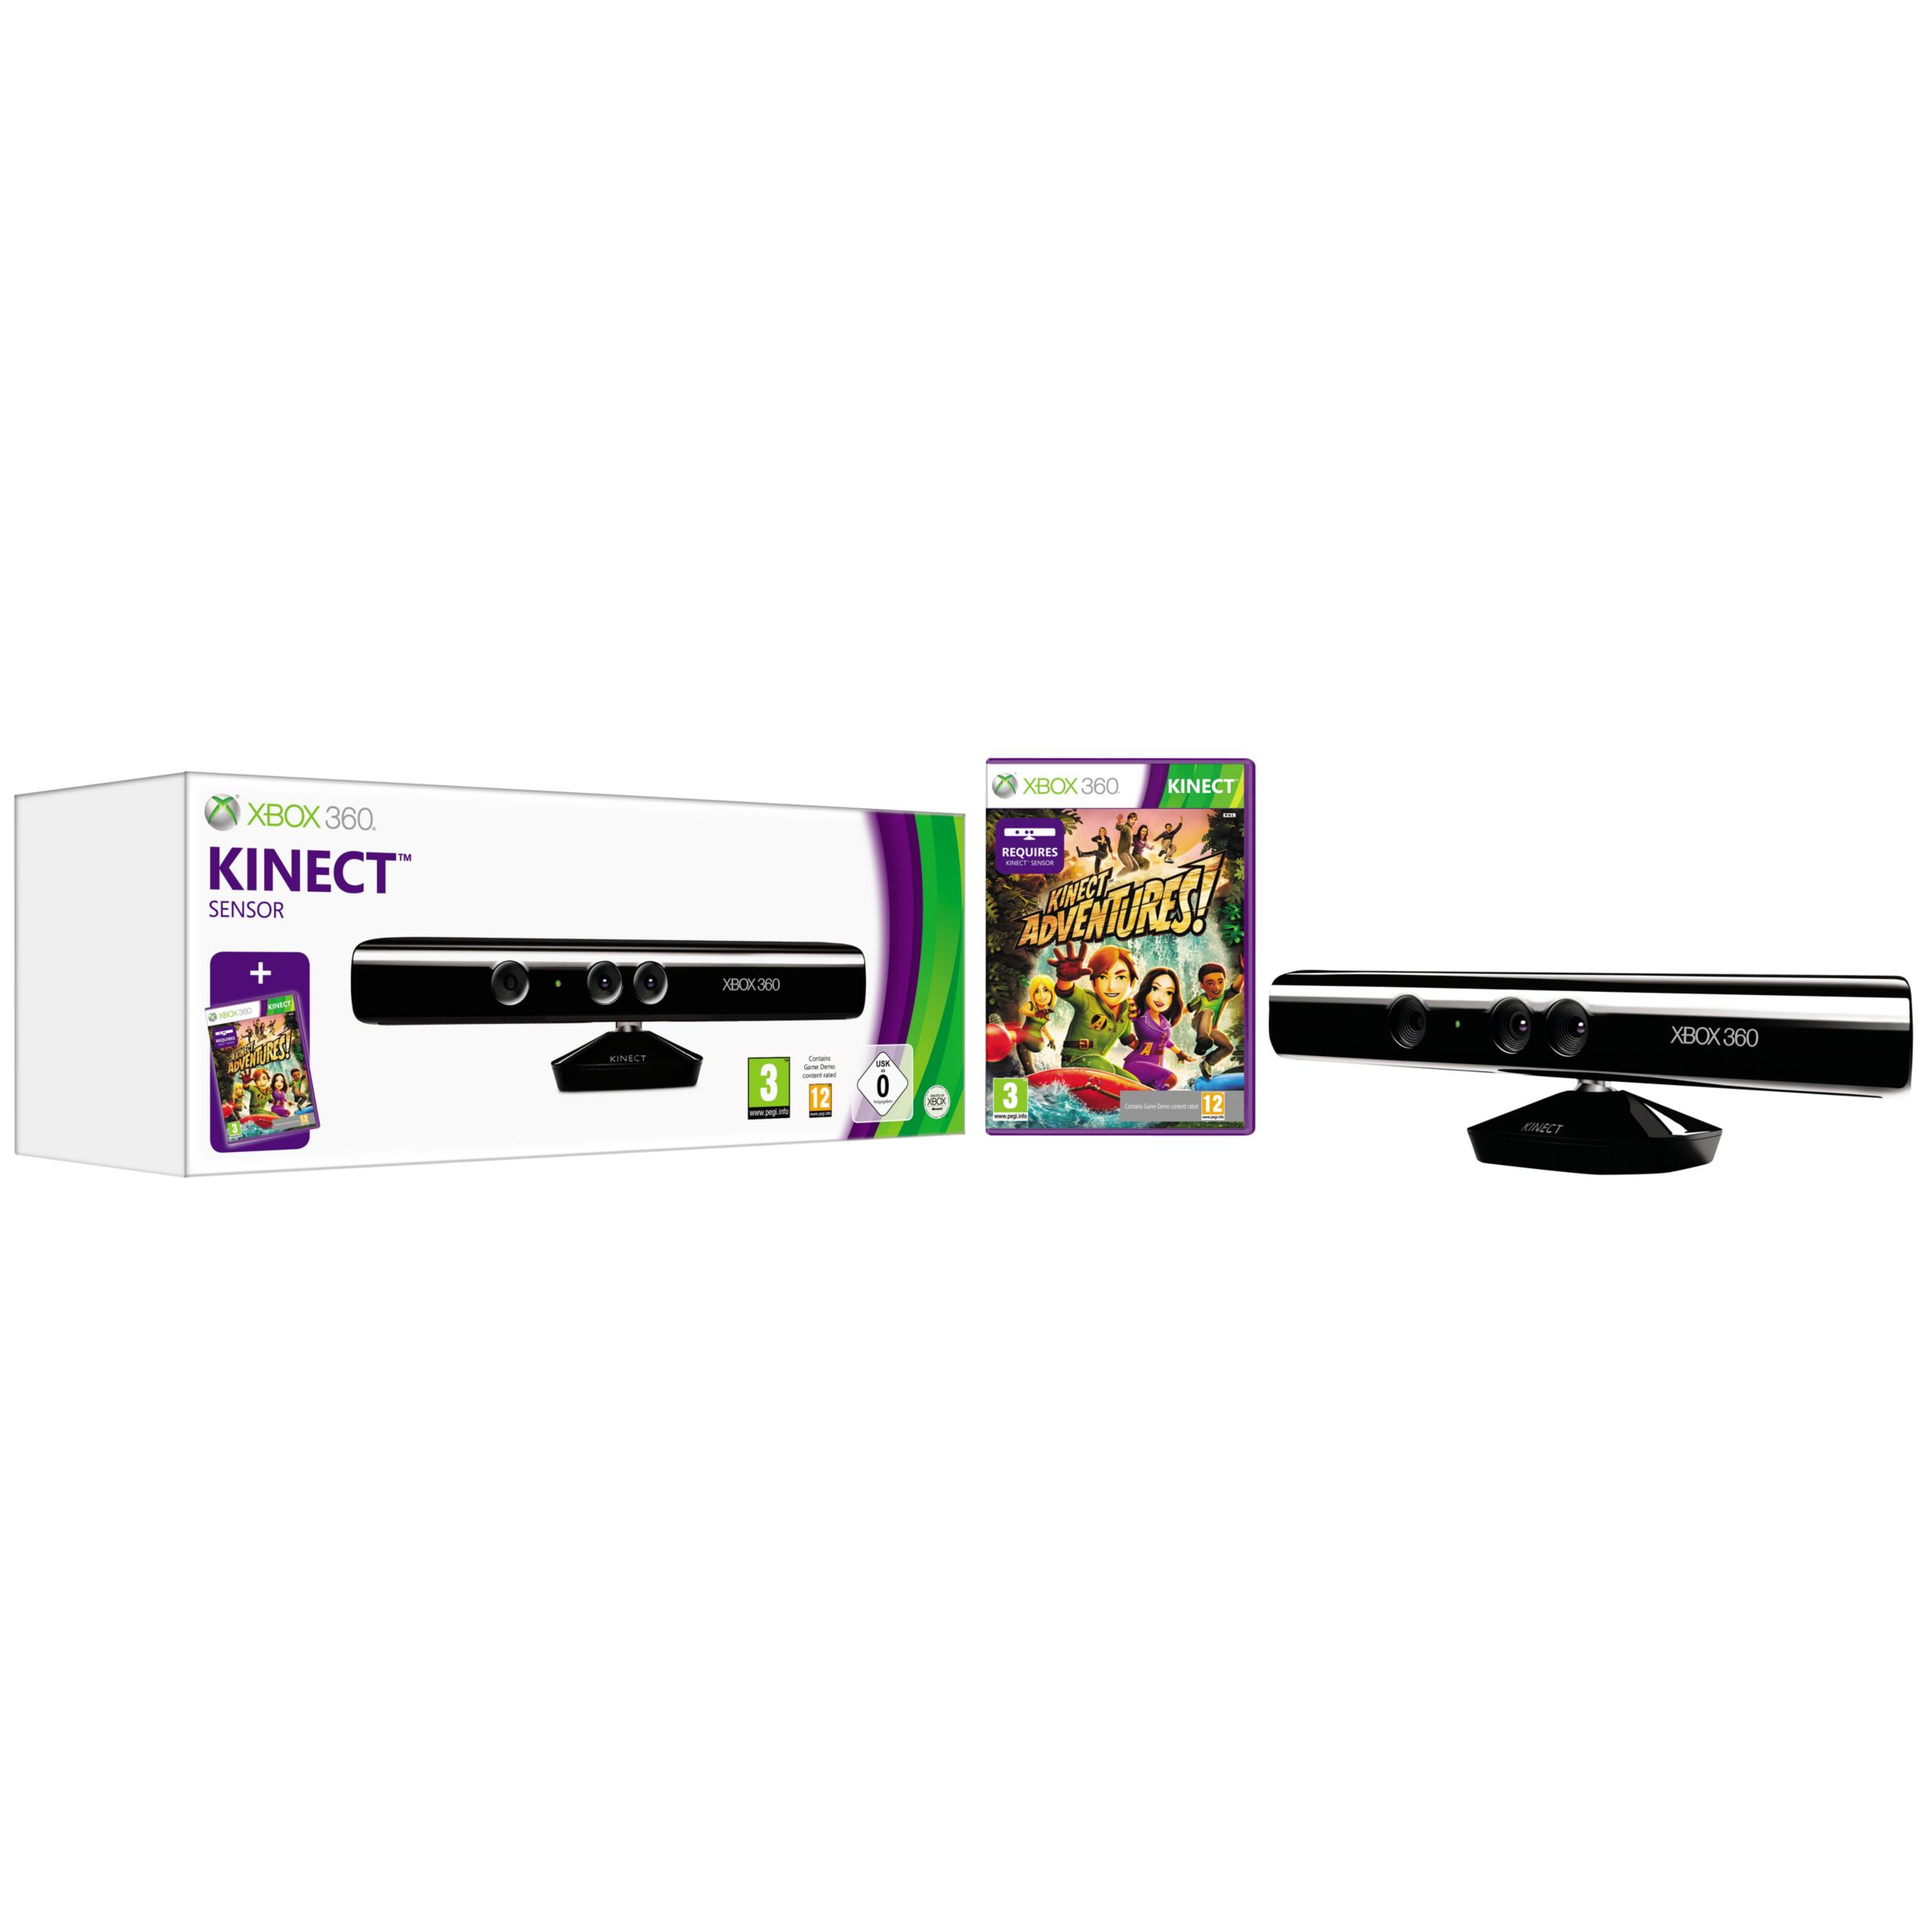 Microsoft Kinect Controller, Sports & Kinectimals for Xbox 360 at JohnLewis